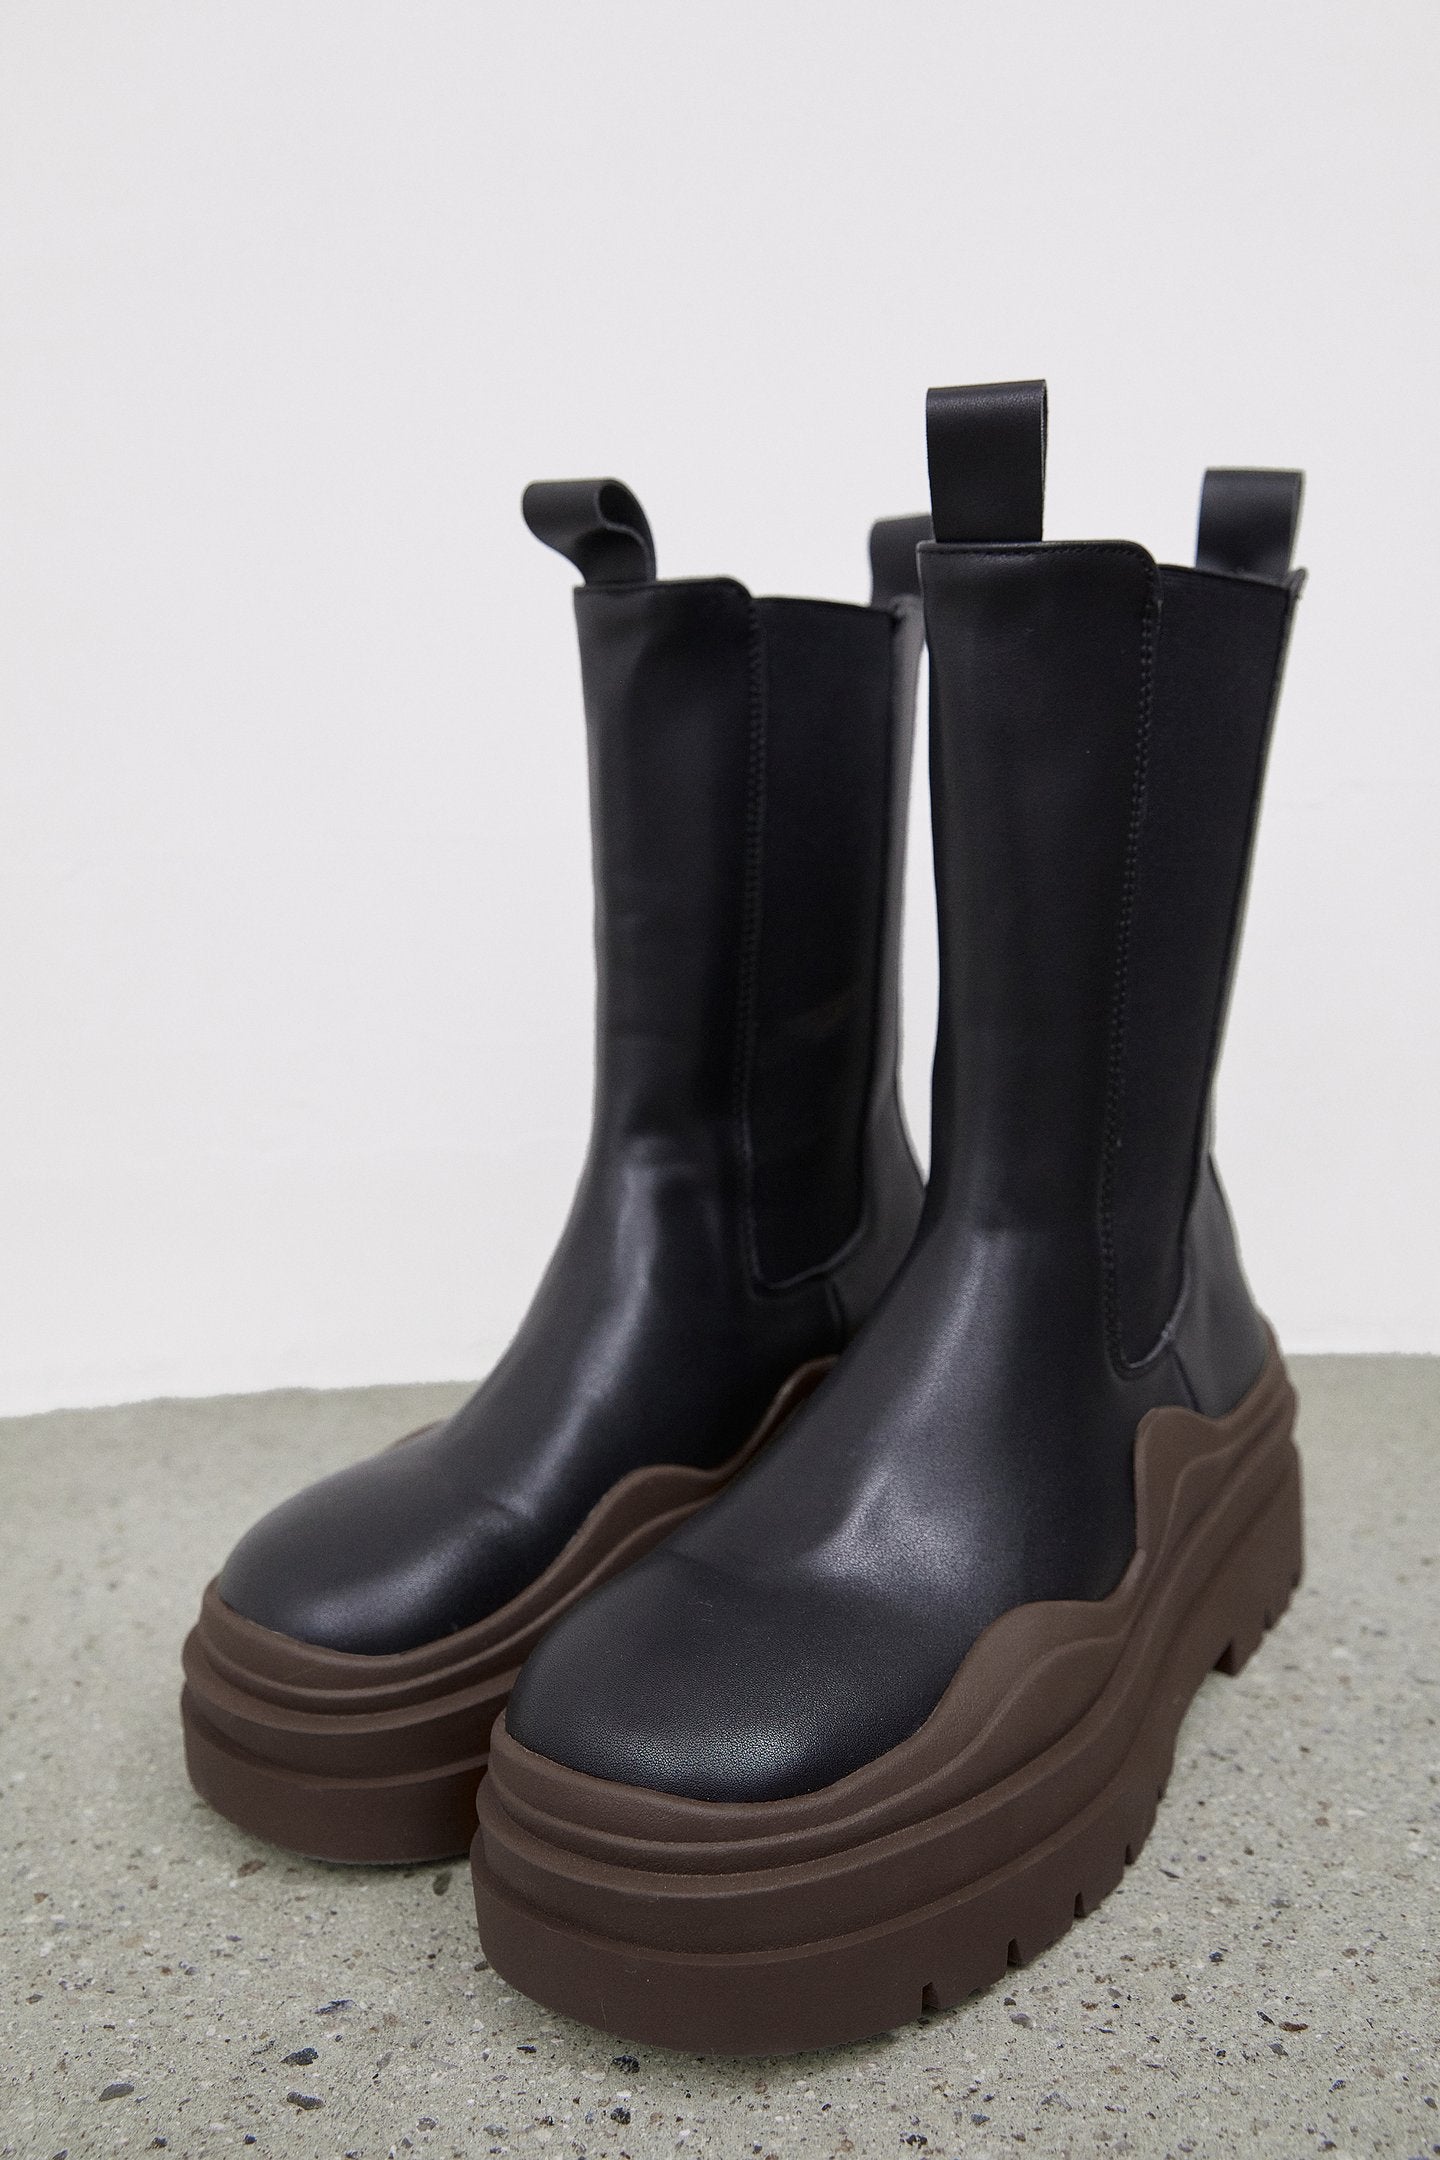 The Source Unknown + High Platform Ankle Boots, Brown & Black